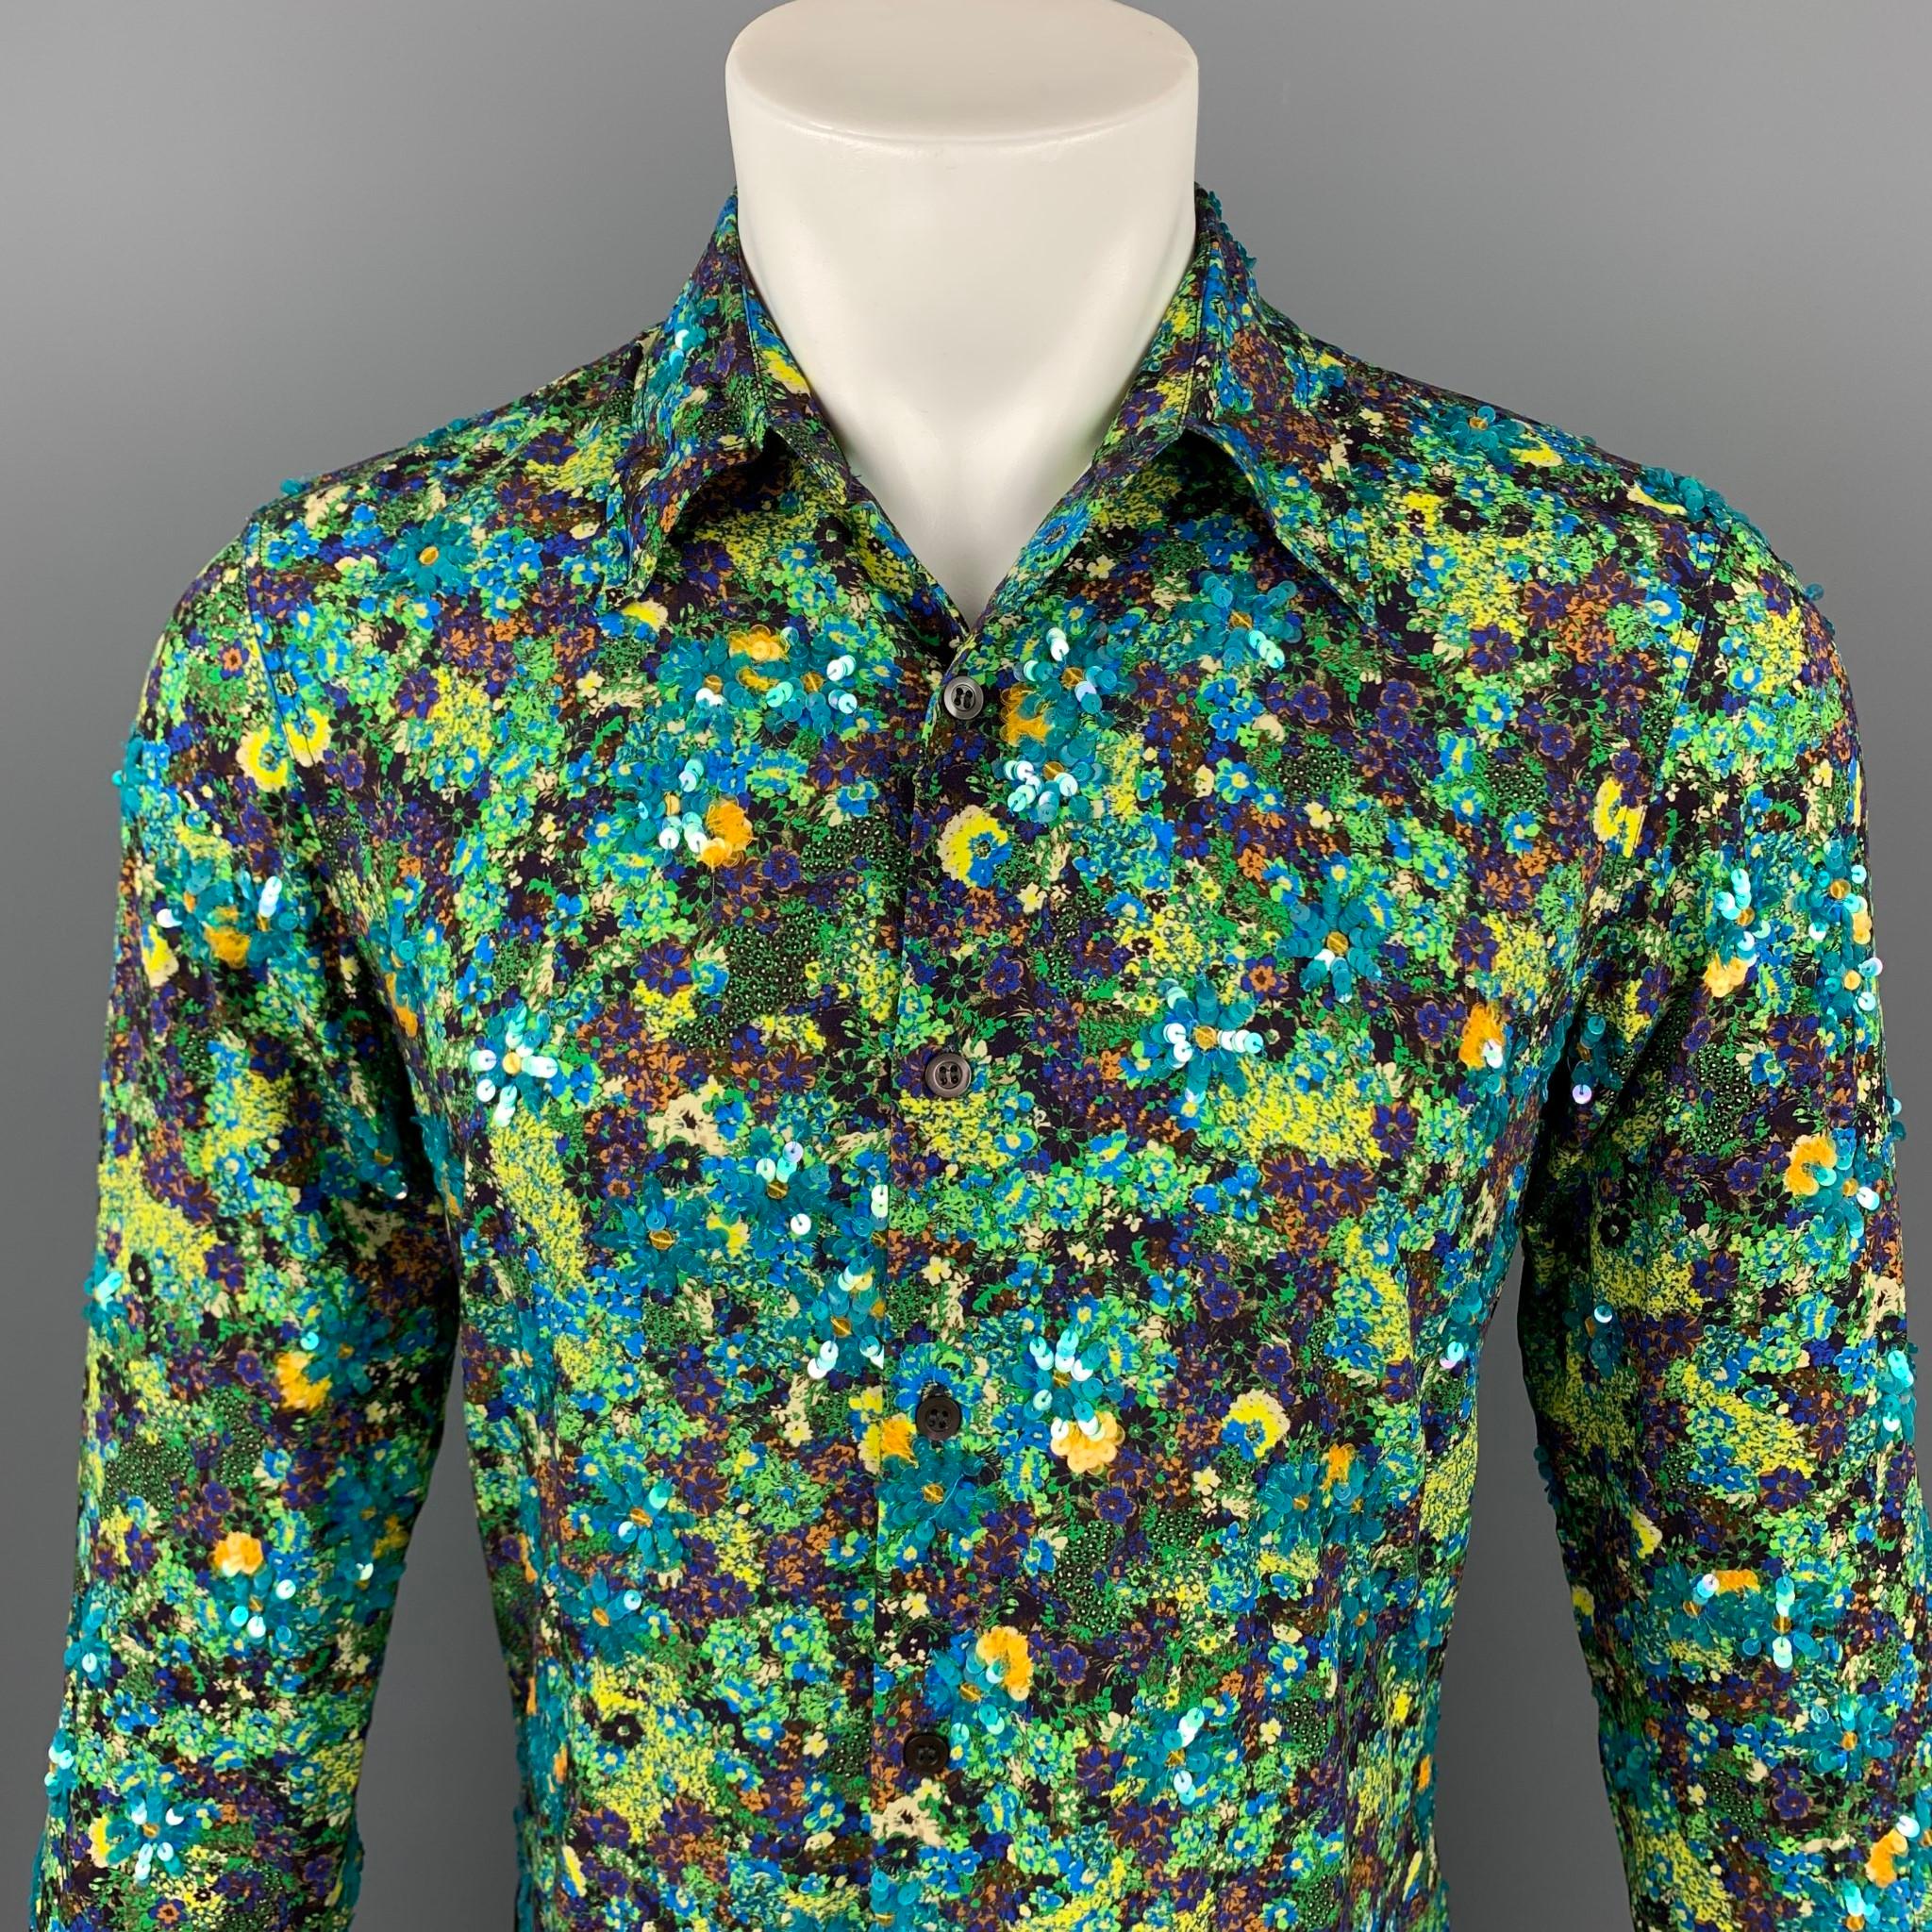 DRIES VAN NOTEN long sleeve shirt comes in a green & blue print viscose with floral sequin details featuring a button up style and a spread collar.

New With Tags. 
Marked: 46
Original Retail Price: $820.00

Measurements:

Shoulder: 17 in.
Chest: 36